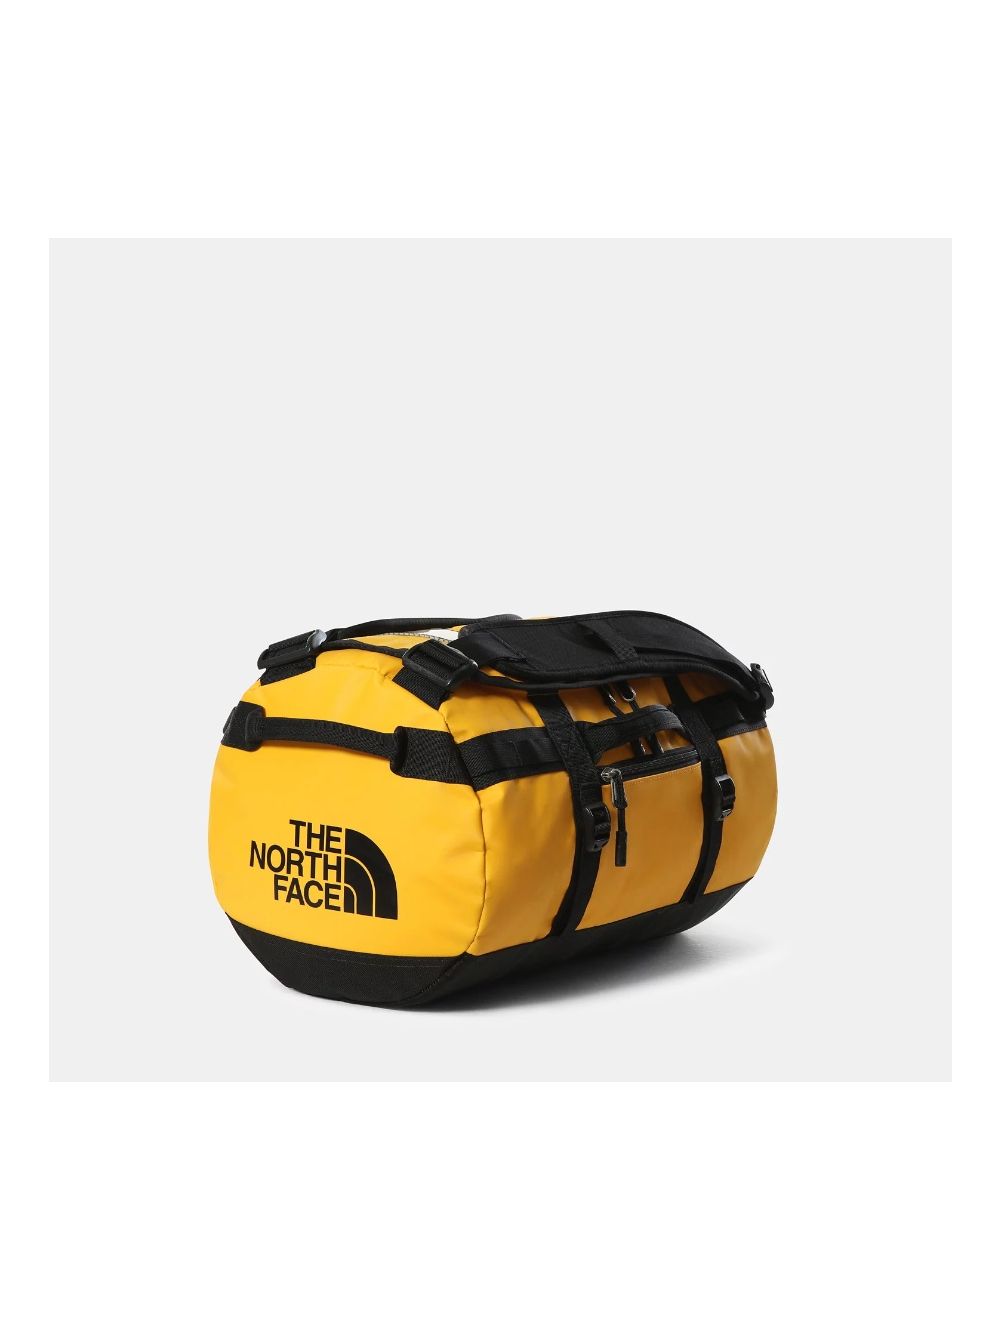 dempen commando vogel The North Face Base Camp Duffel XS | Duurzame tas van gerecycled materiaal